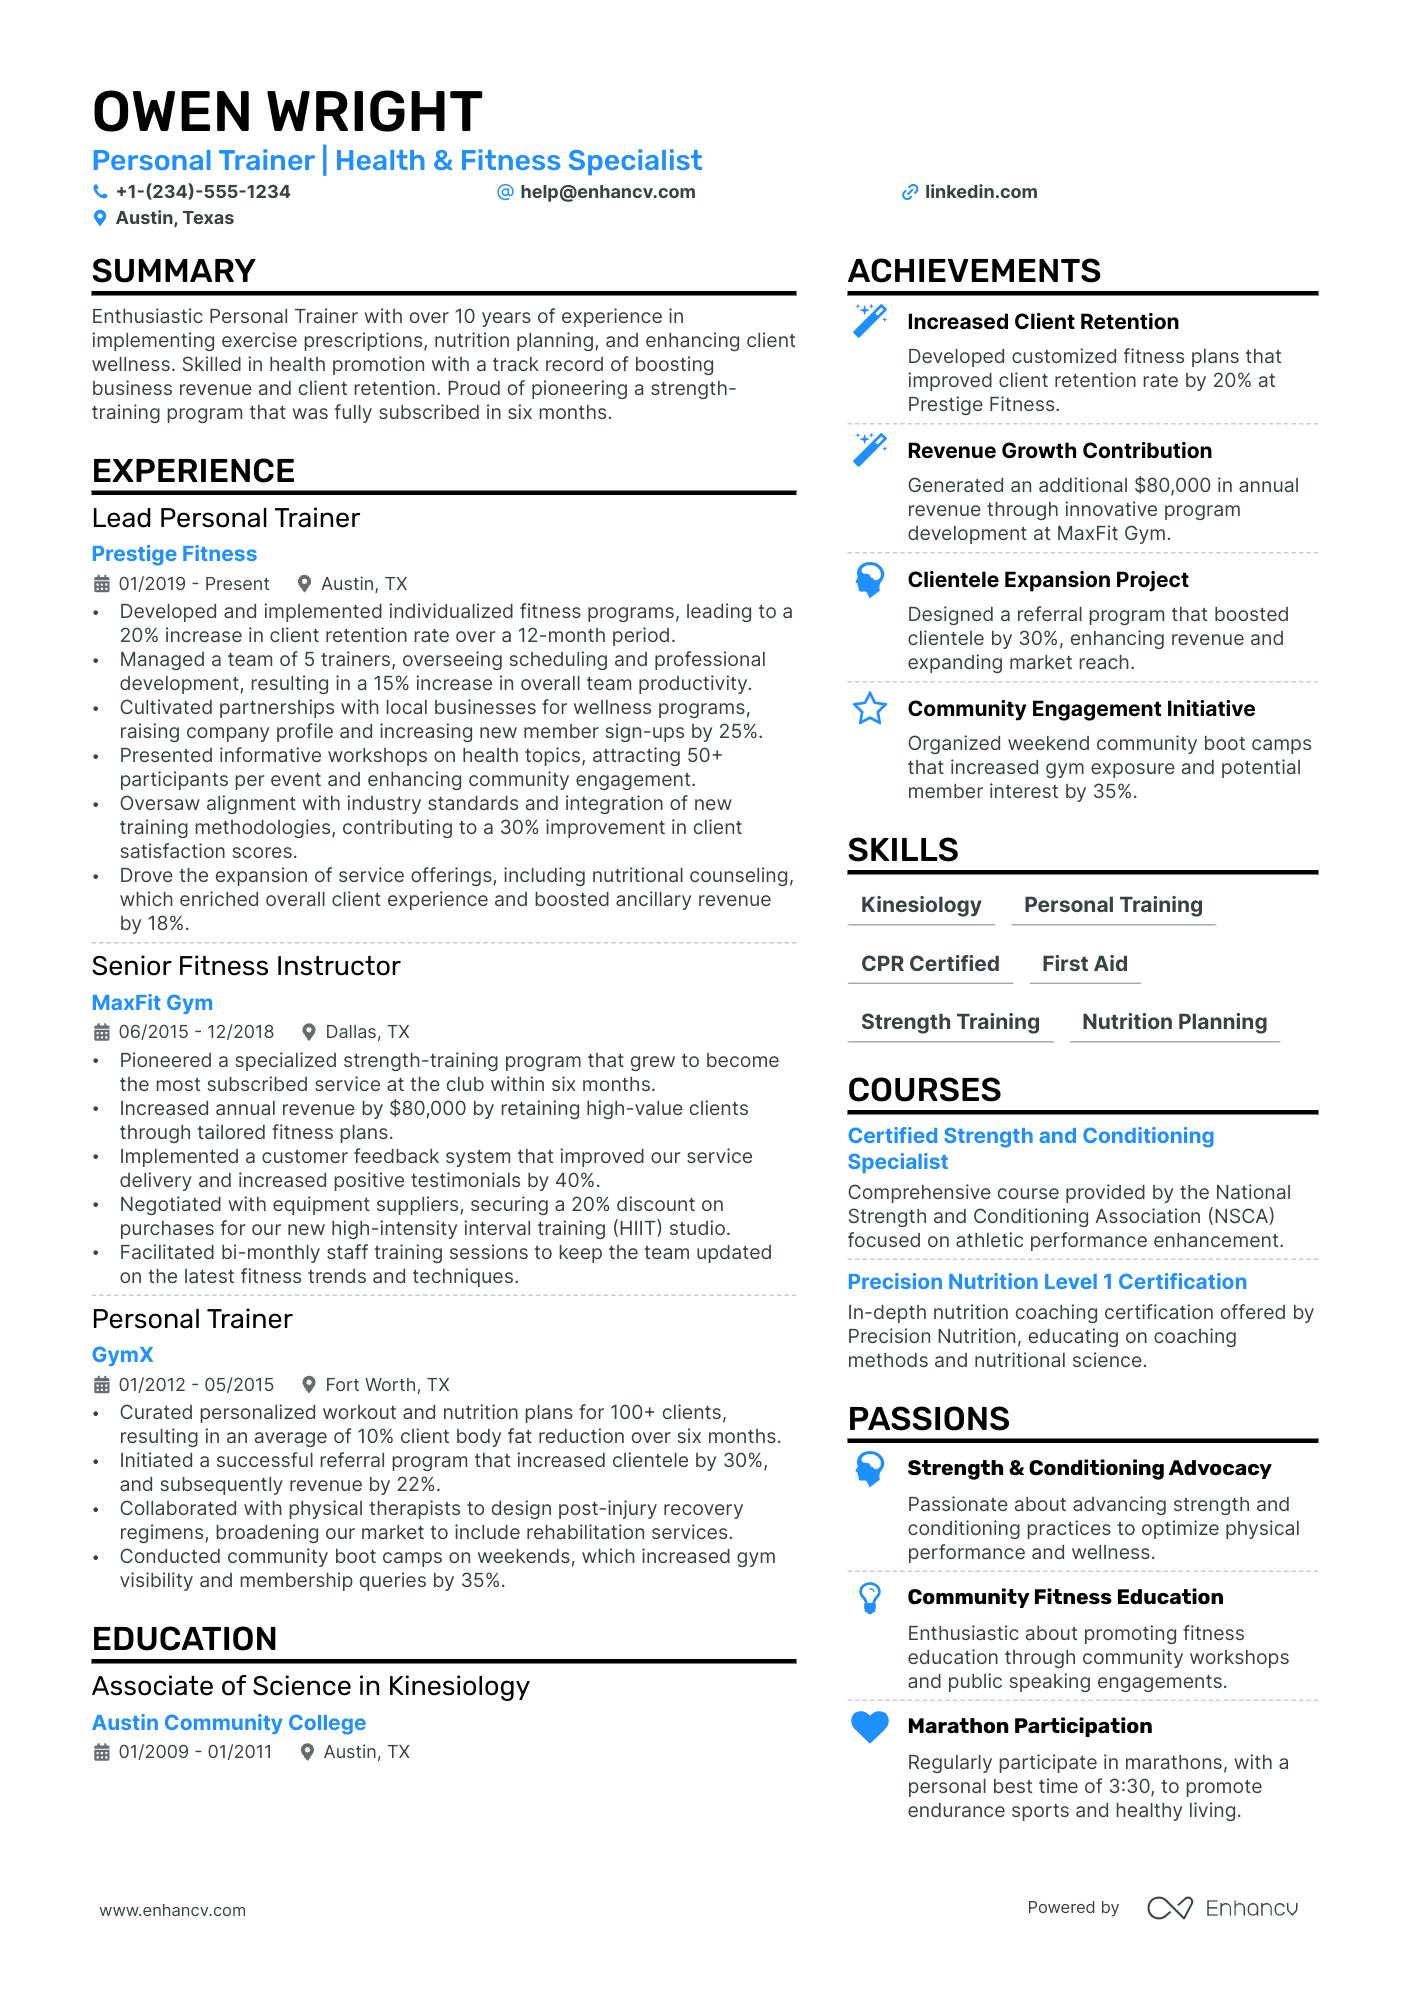 Personal Trainer resume example